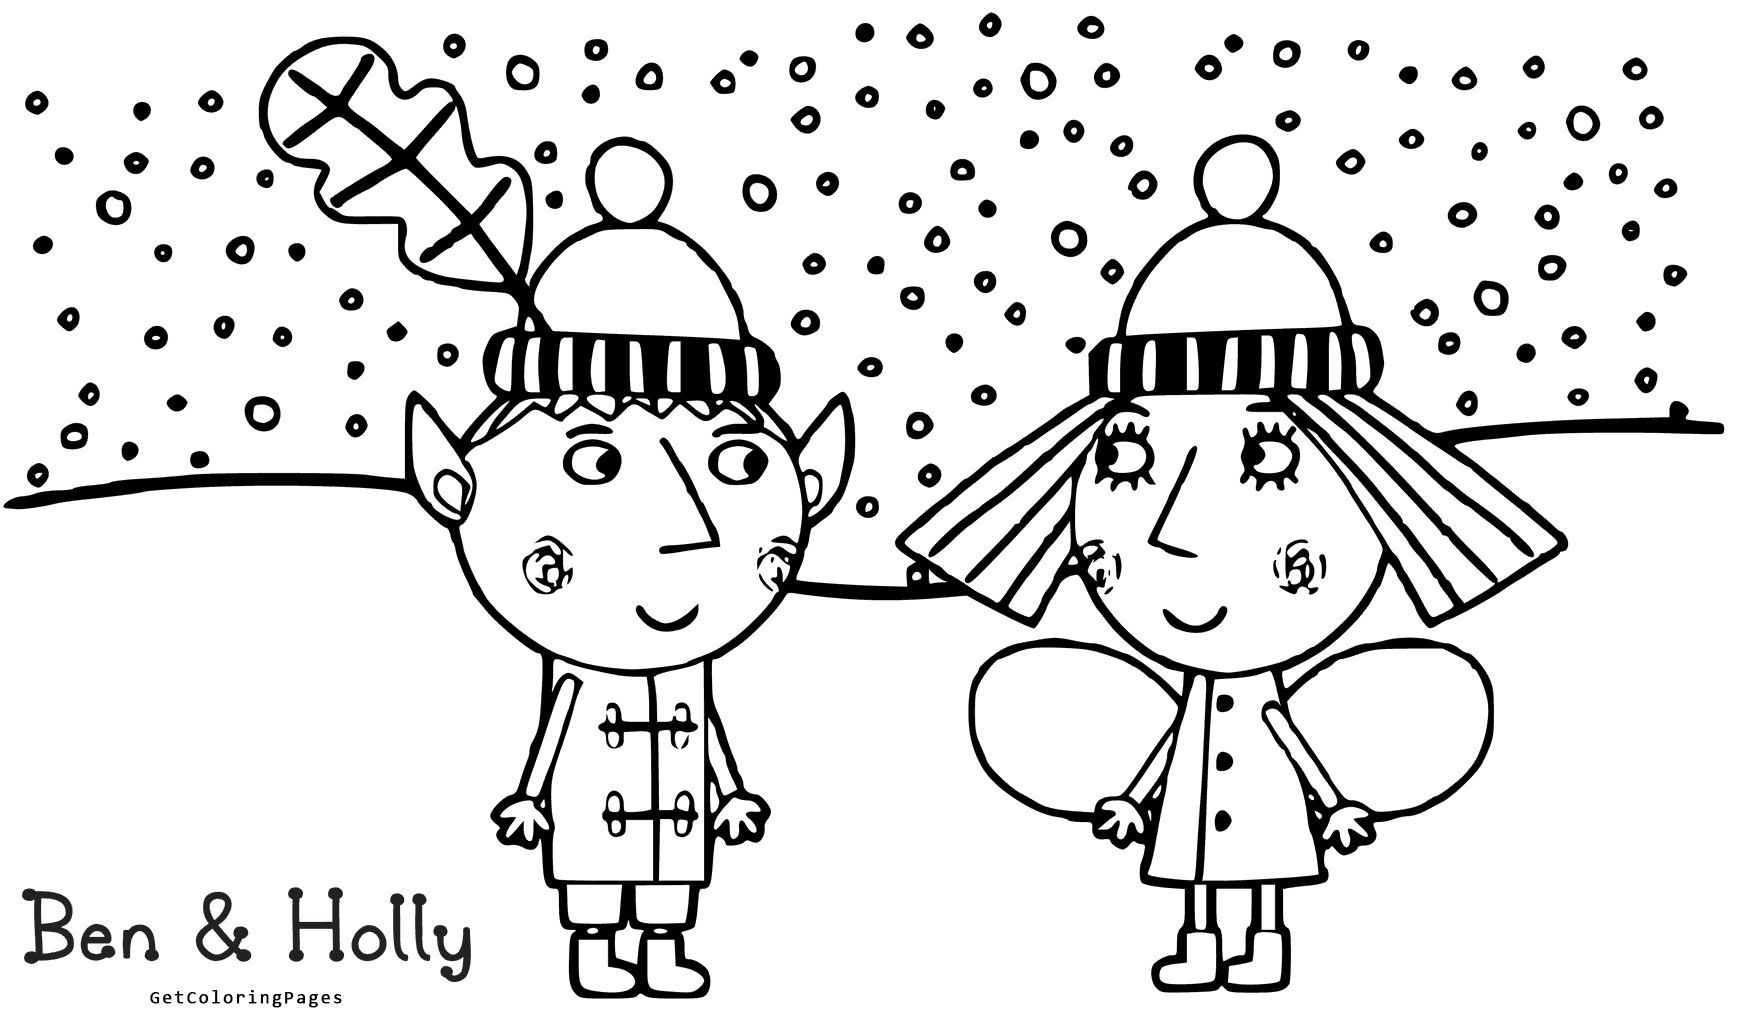 Ben and Holly Little Kingdom Snow Coloring Pages - Get Coloring Pages